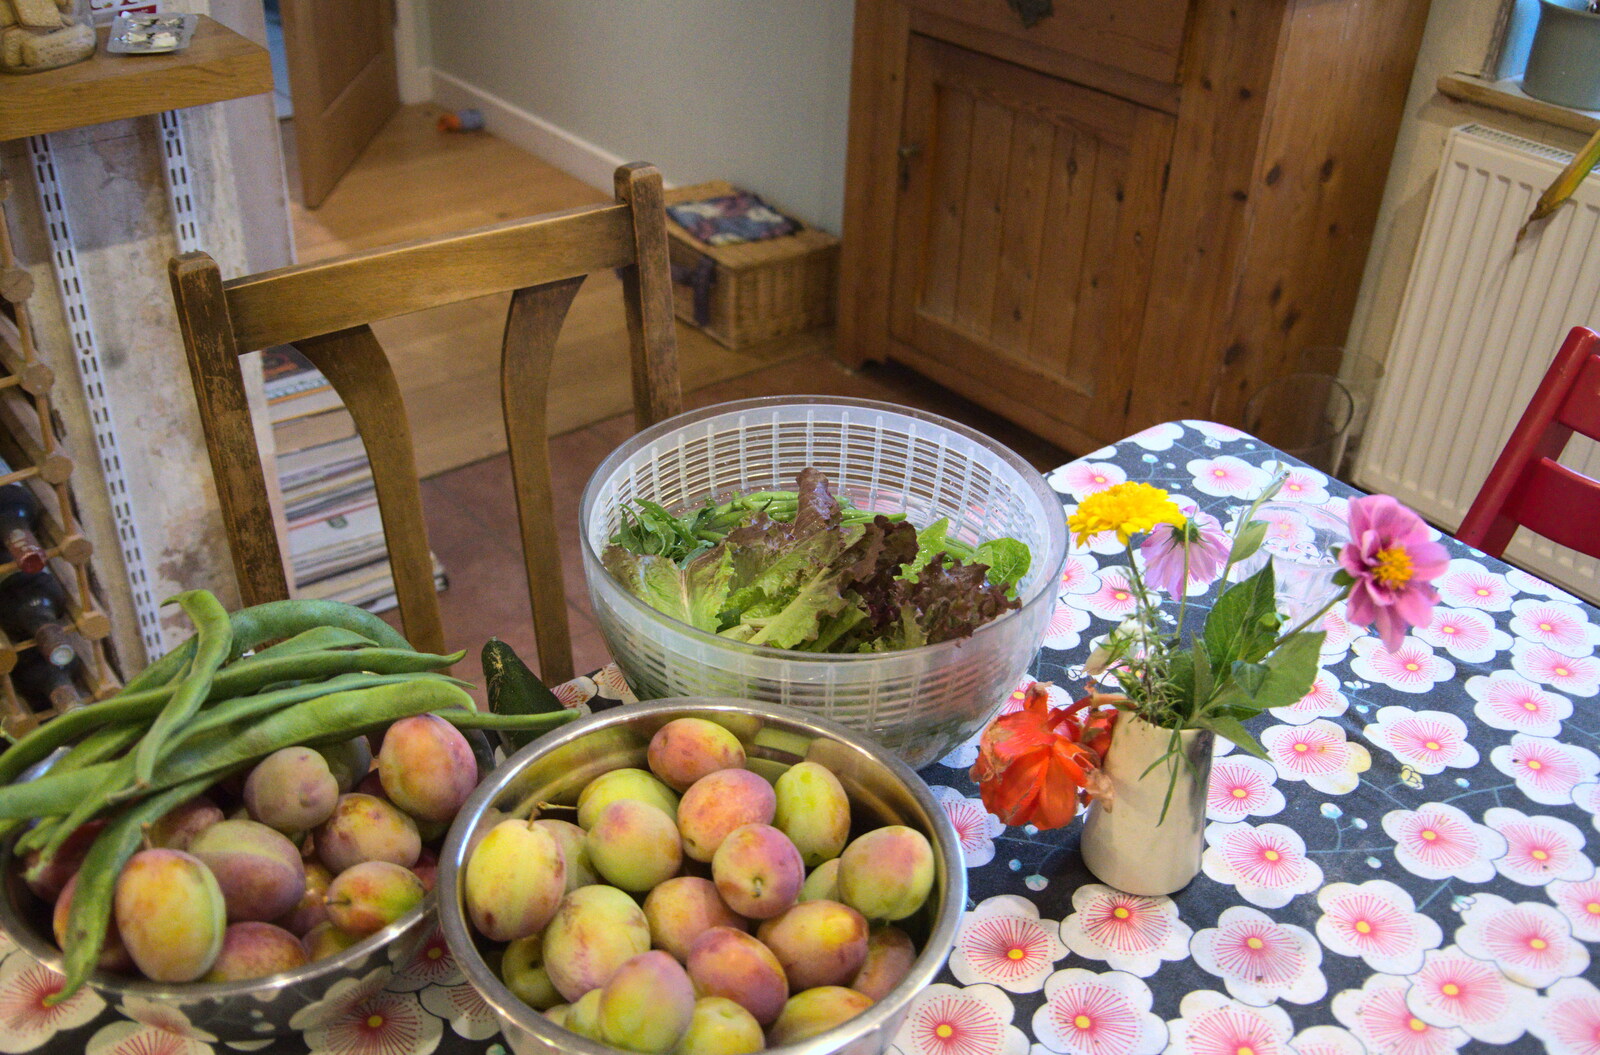 Produce from the garden from Jules Visits, and a Trip to Tyrrel's Wood, Pulham Market, Norfolk - 16th August 2020